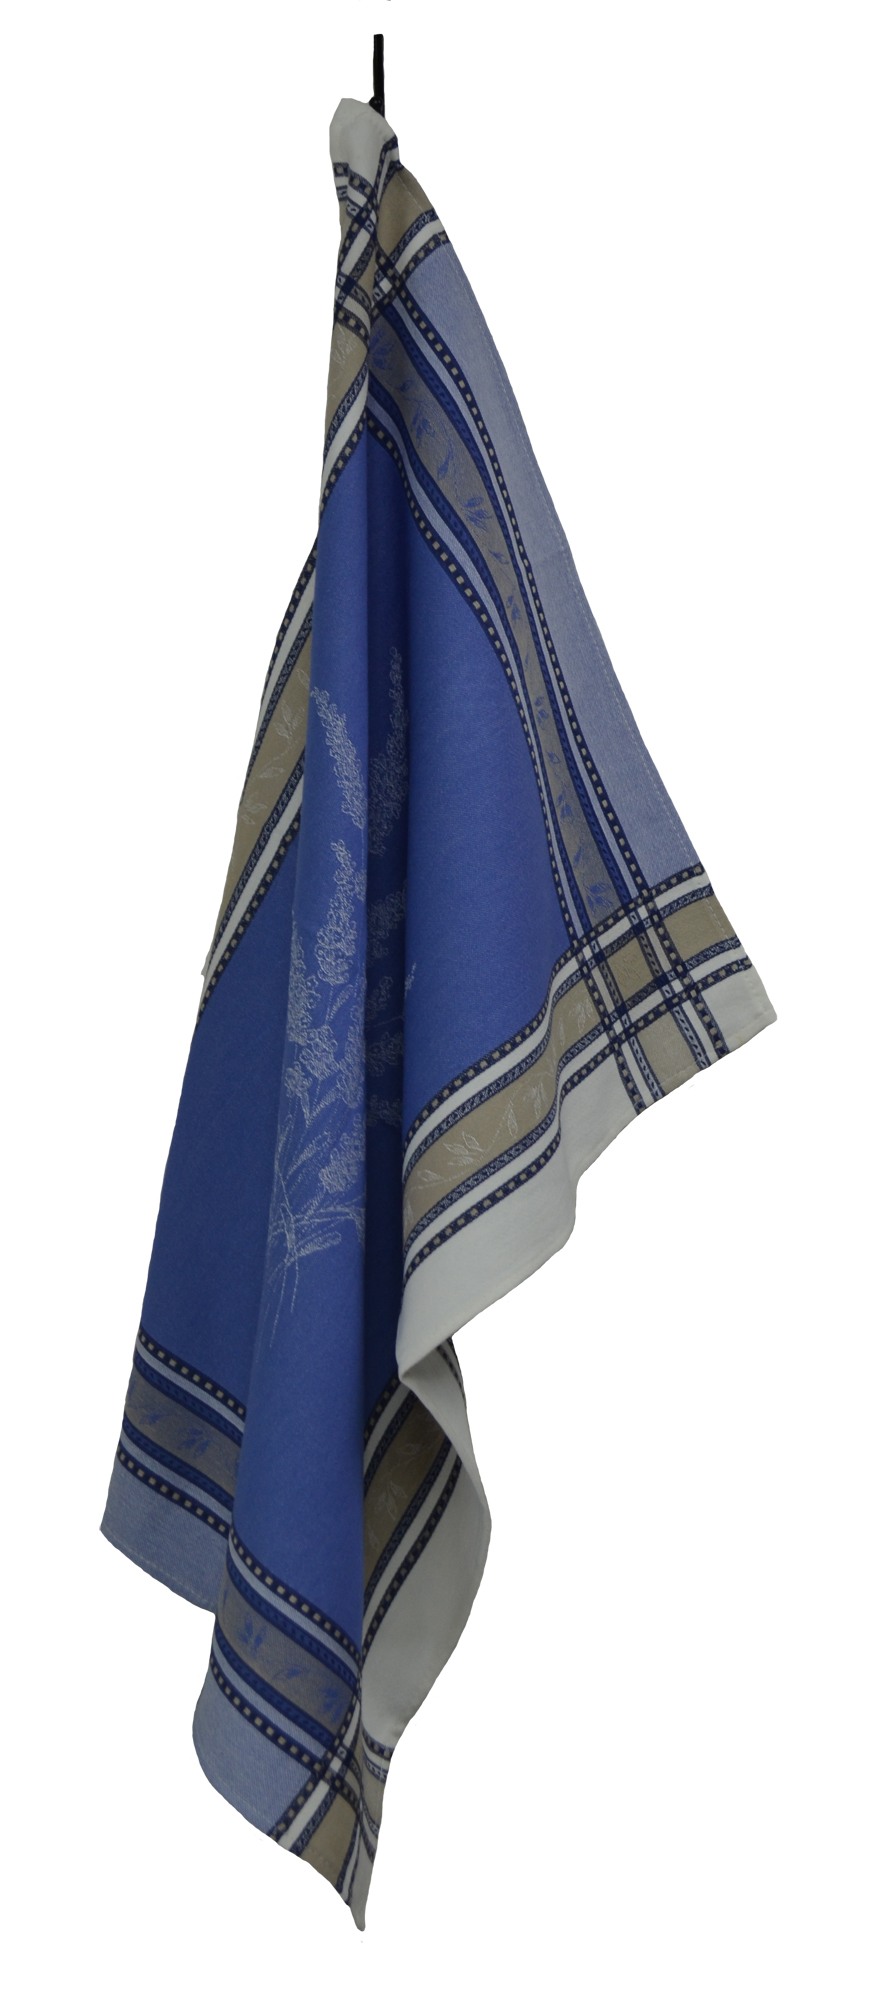 Floral French Jacquard Tea Towel - Collection "Senanque" Blue/Cream, Size: 21 x 27 inches, Price CAN$19.95